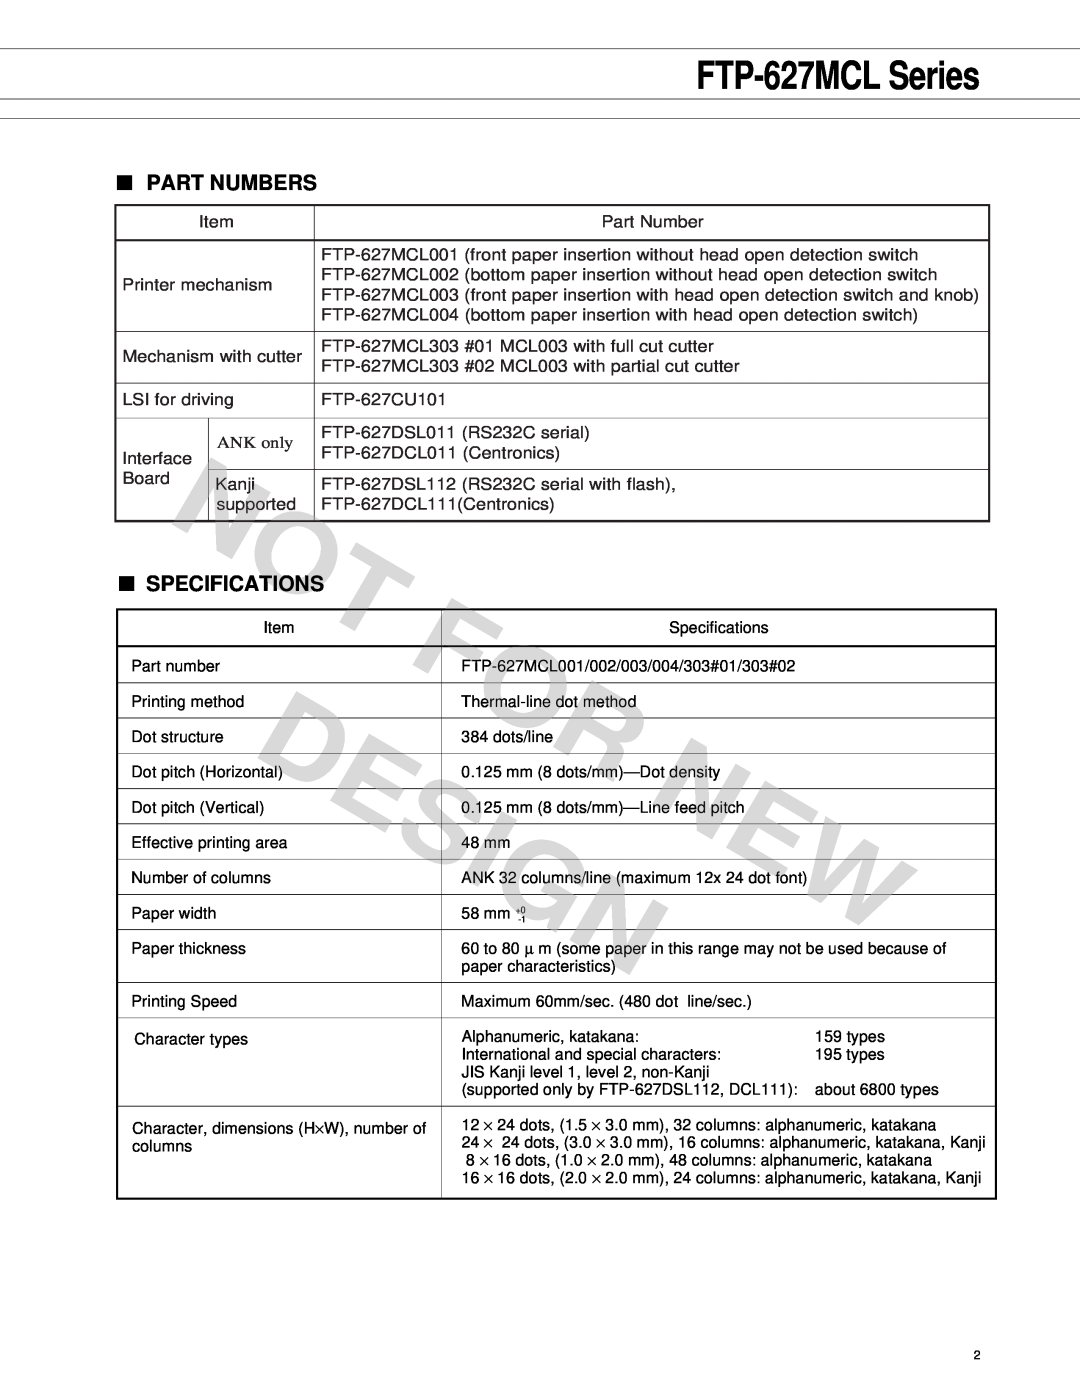 Fujitsu FTP-627 Series manual FTP-627MCL Series, Part Numbers, Specifications, Design 